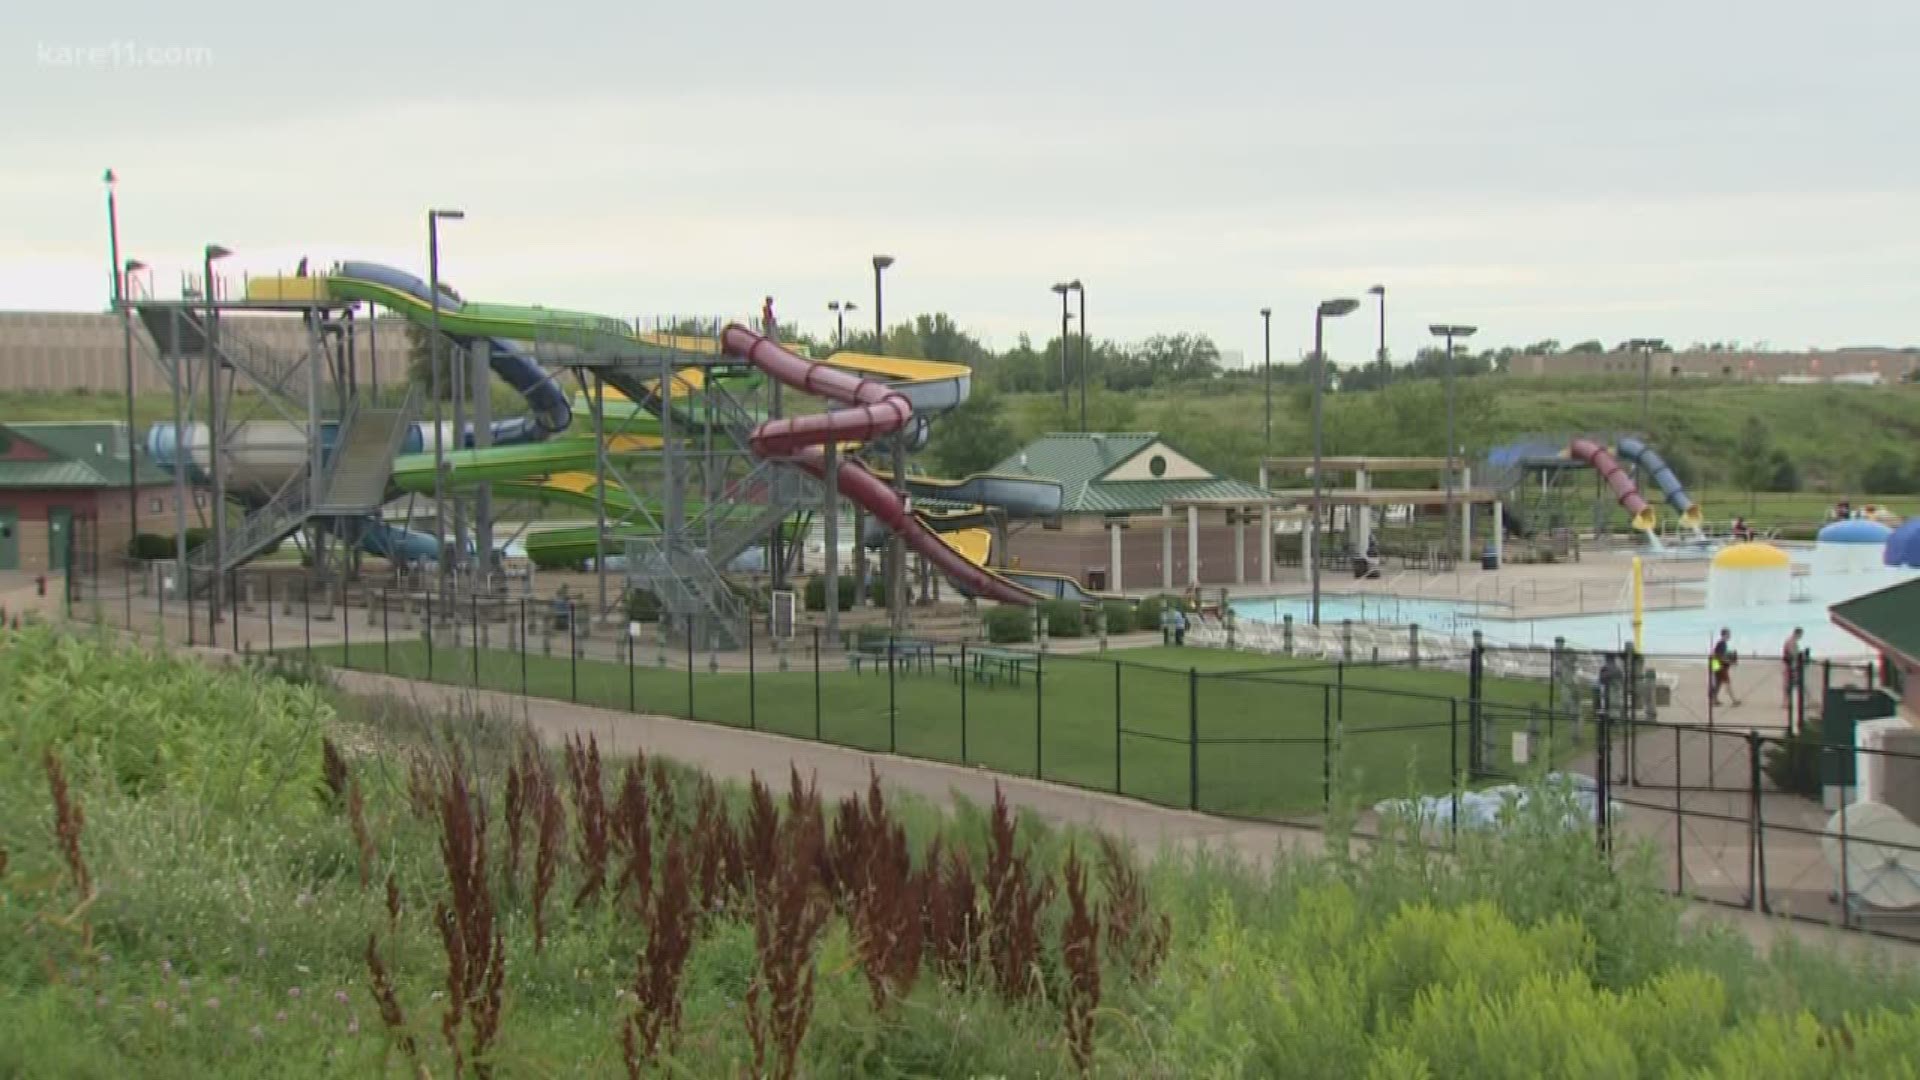 An 8-year-old boy is in the hospital after police say he was pushed by a man from a waterslide platform, falling 31 feet to the concrete below. http://www.kare11.com/news/man-charged-after-boy-falls-31-feet-off-waterslide/579426212